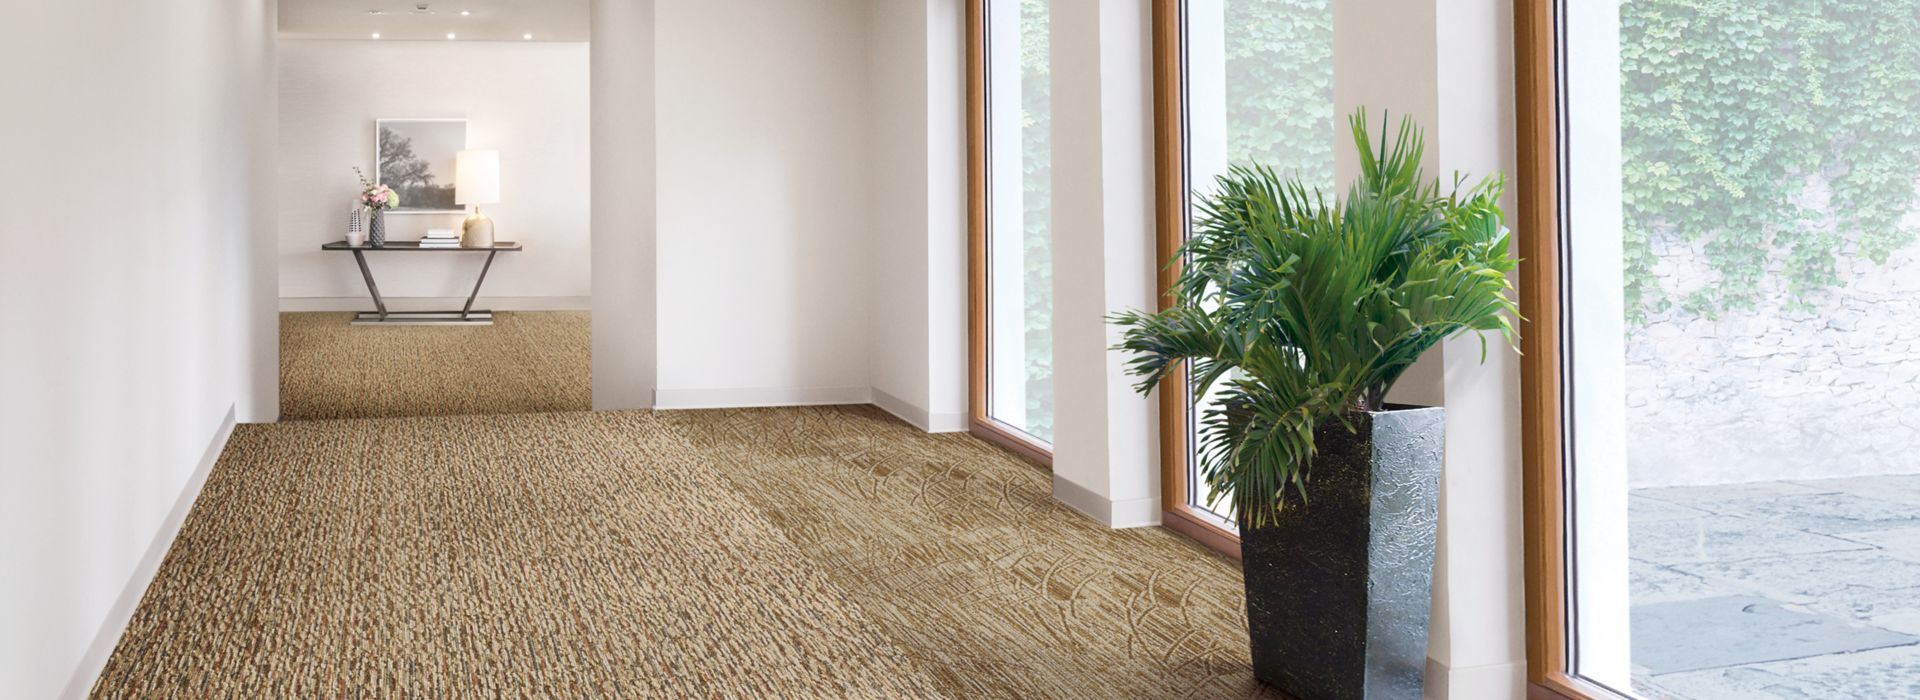 Interface WE152 and Farmland carpet tile in corrridor image number 1